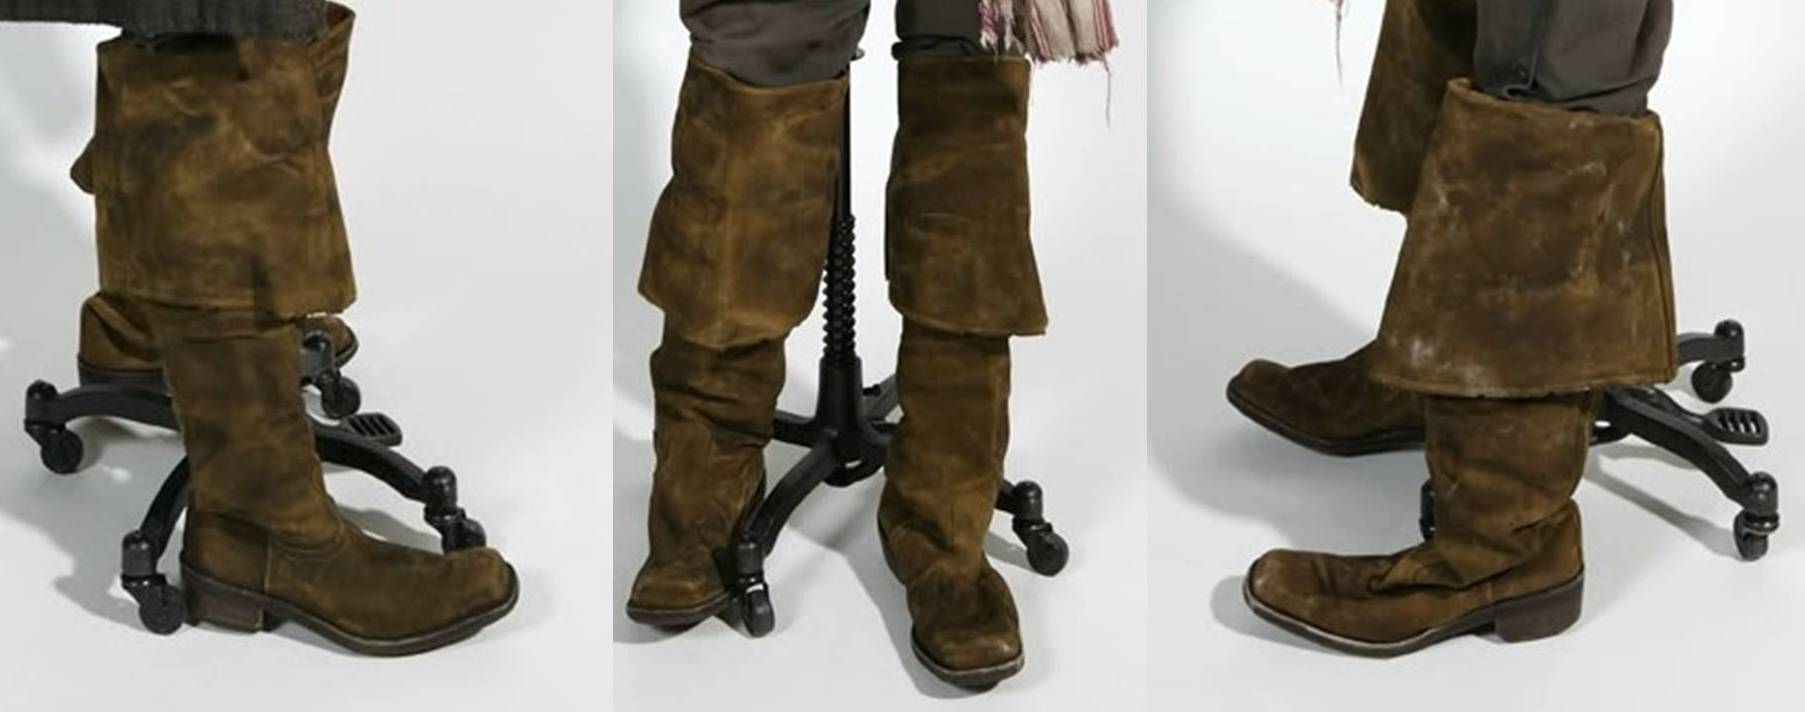 Jack Sparrow Costuming - A Pirate's 